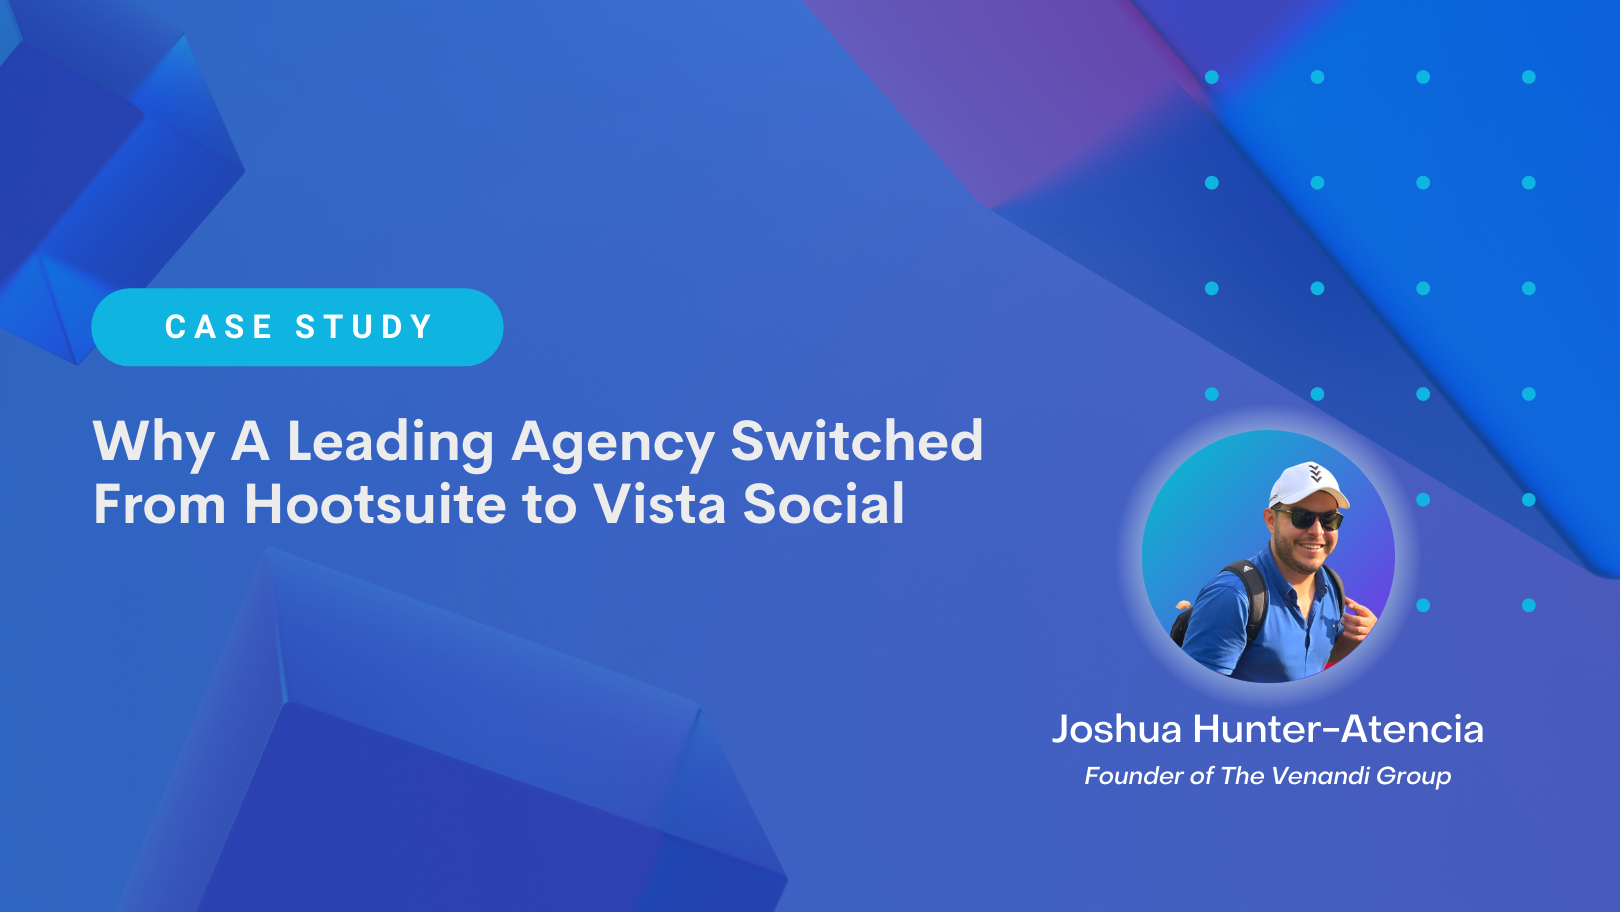 Why A Leading Agency Switched From Hootsuite to Vista Social